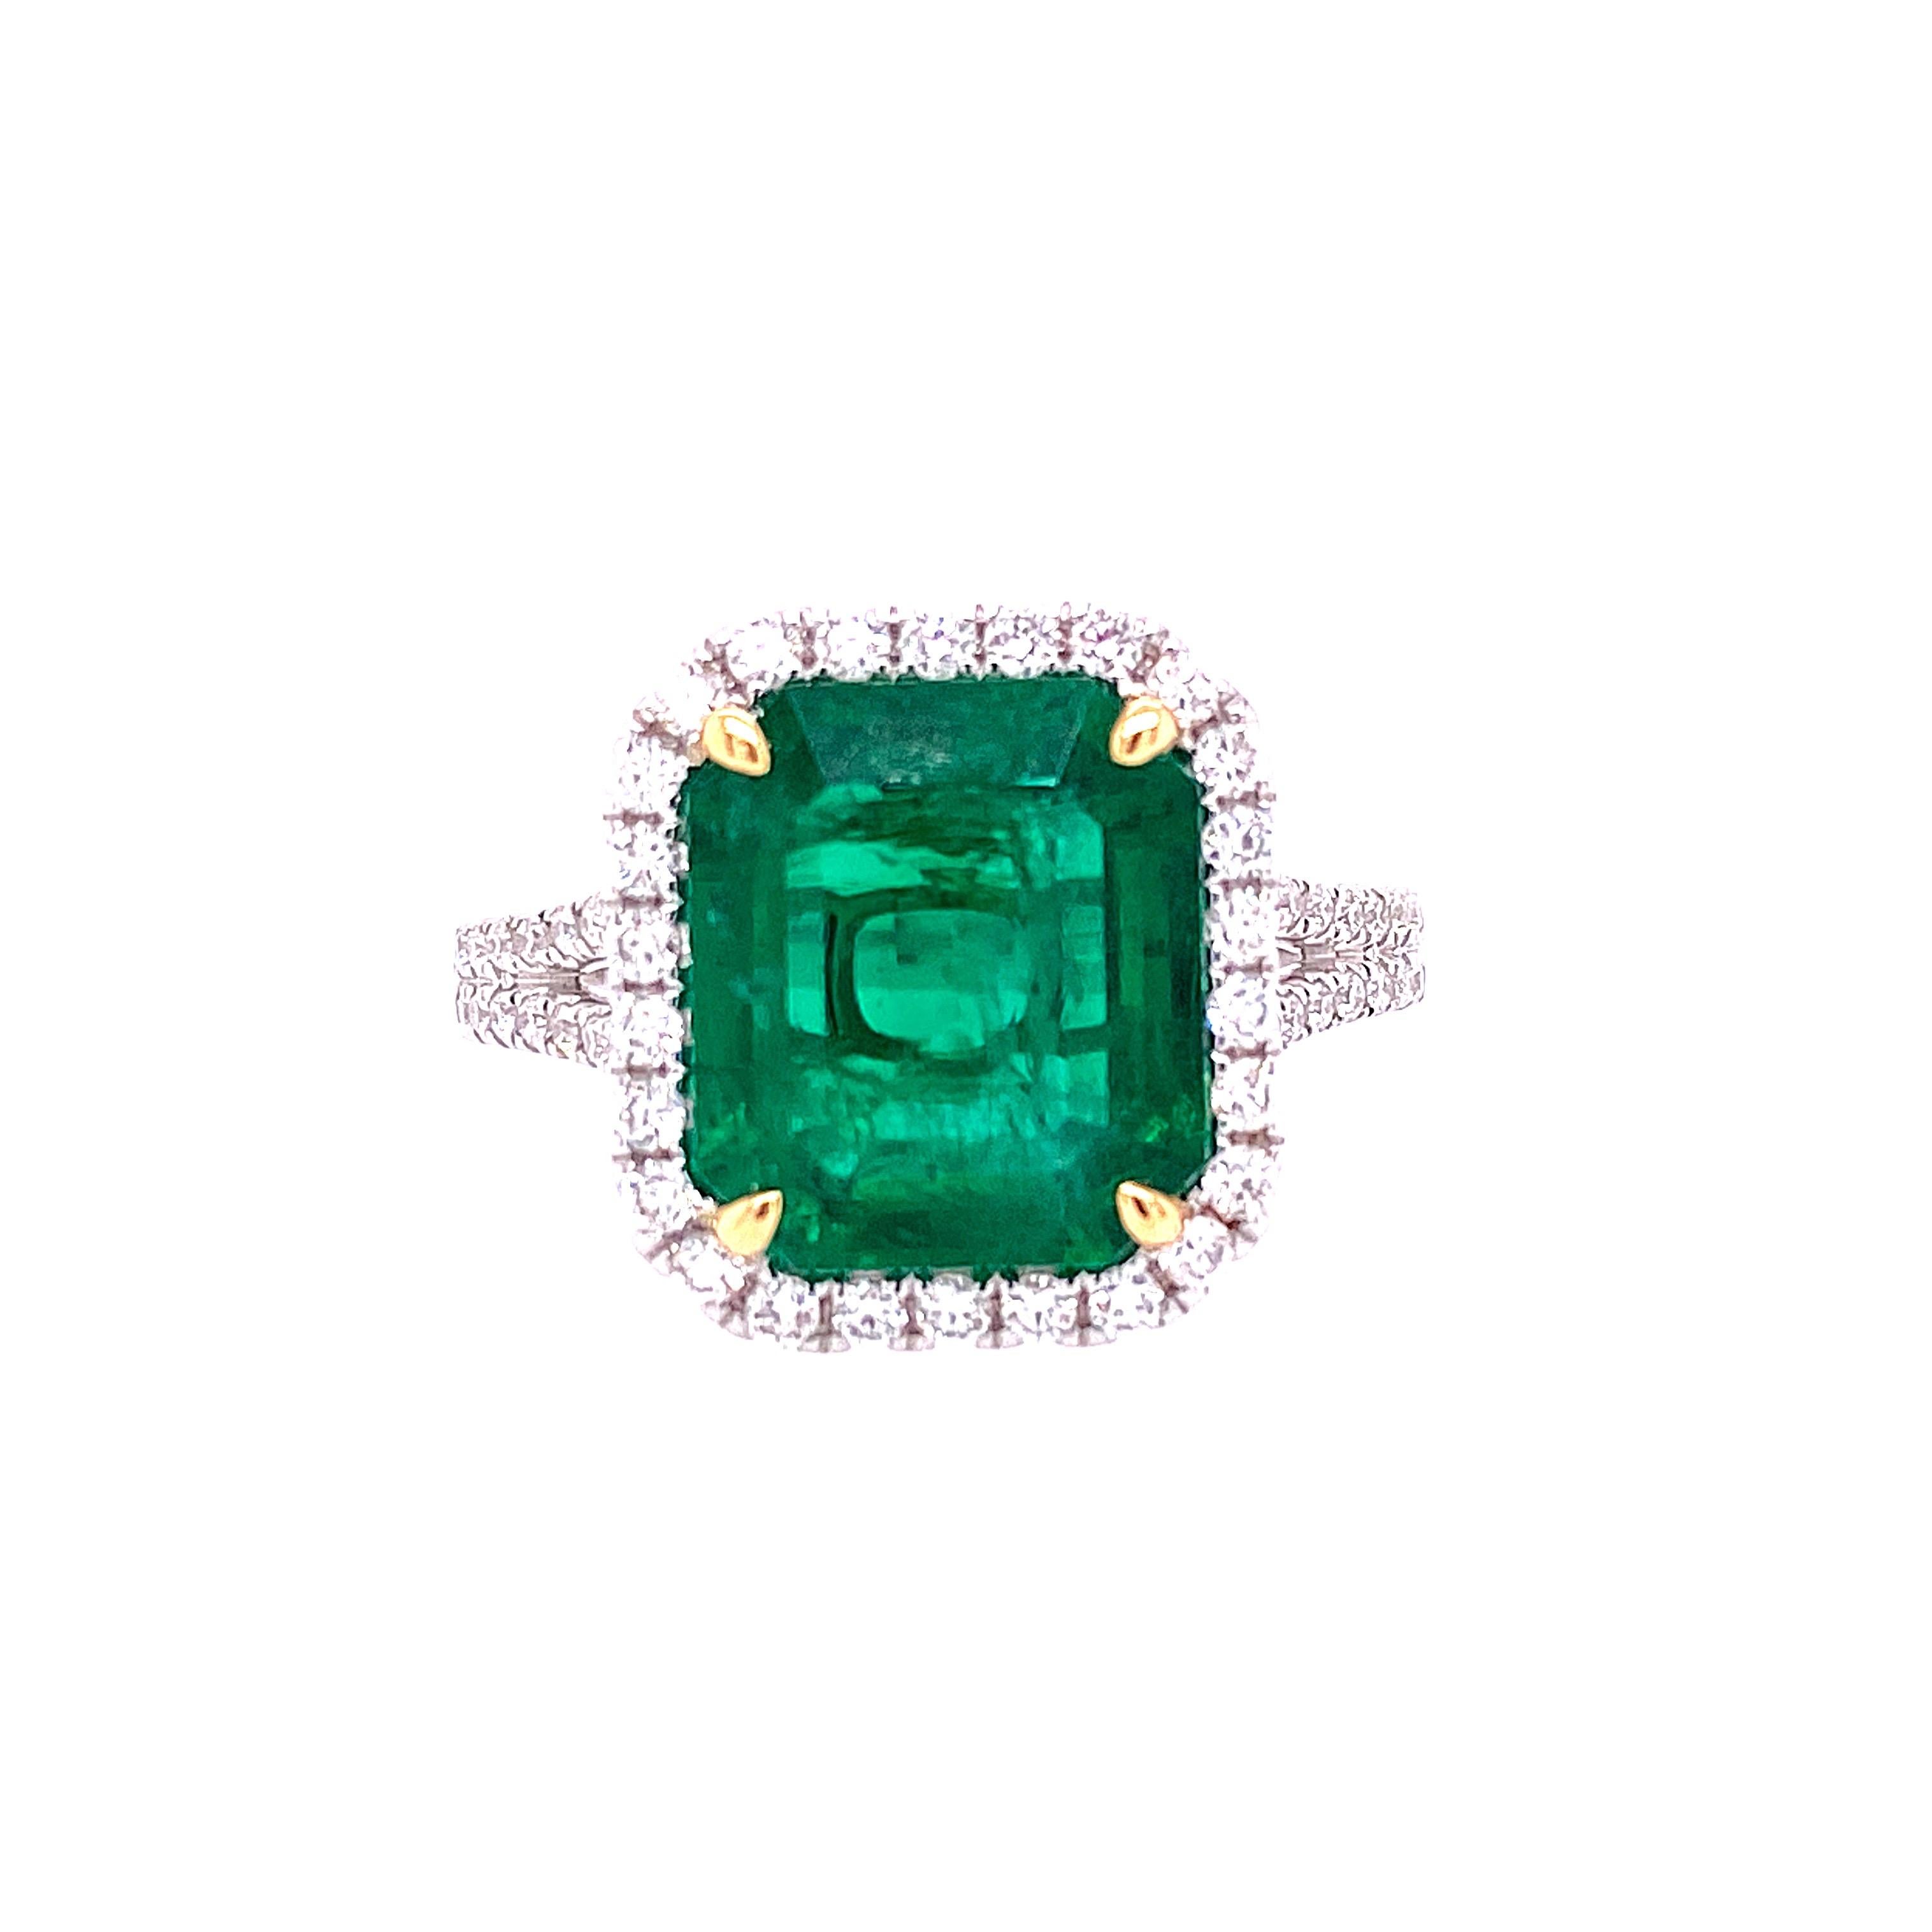 This stunning Cocktail Ring features a beautiful GIA Certified 4.30 Carat Emerald Cut African Emerald with a Diamond Halo, that sits on a Double Diamond Shank. This Ring is set in 18K White Gold, with 18K Yellow Gold prongs on the center stone.